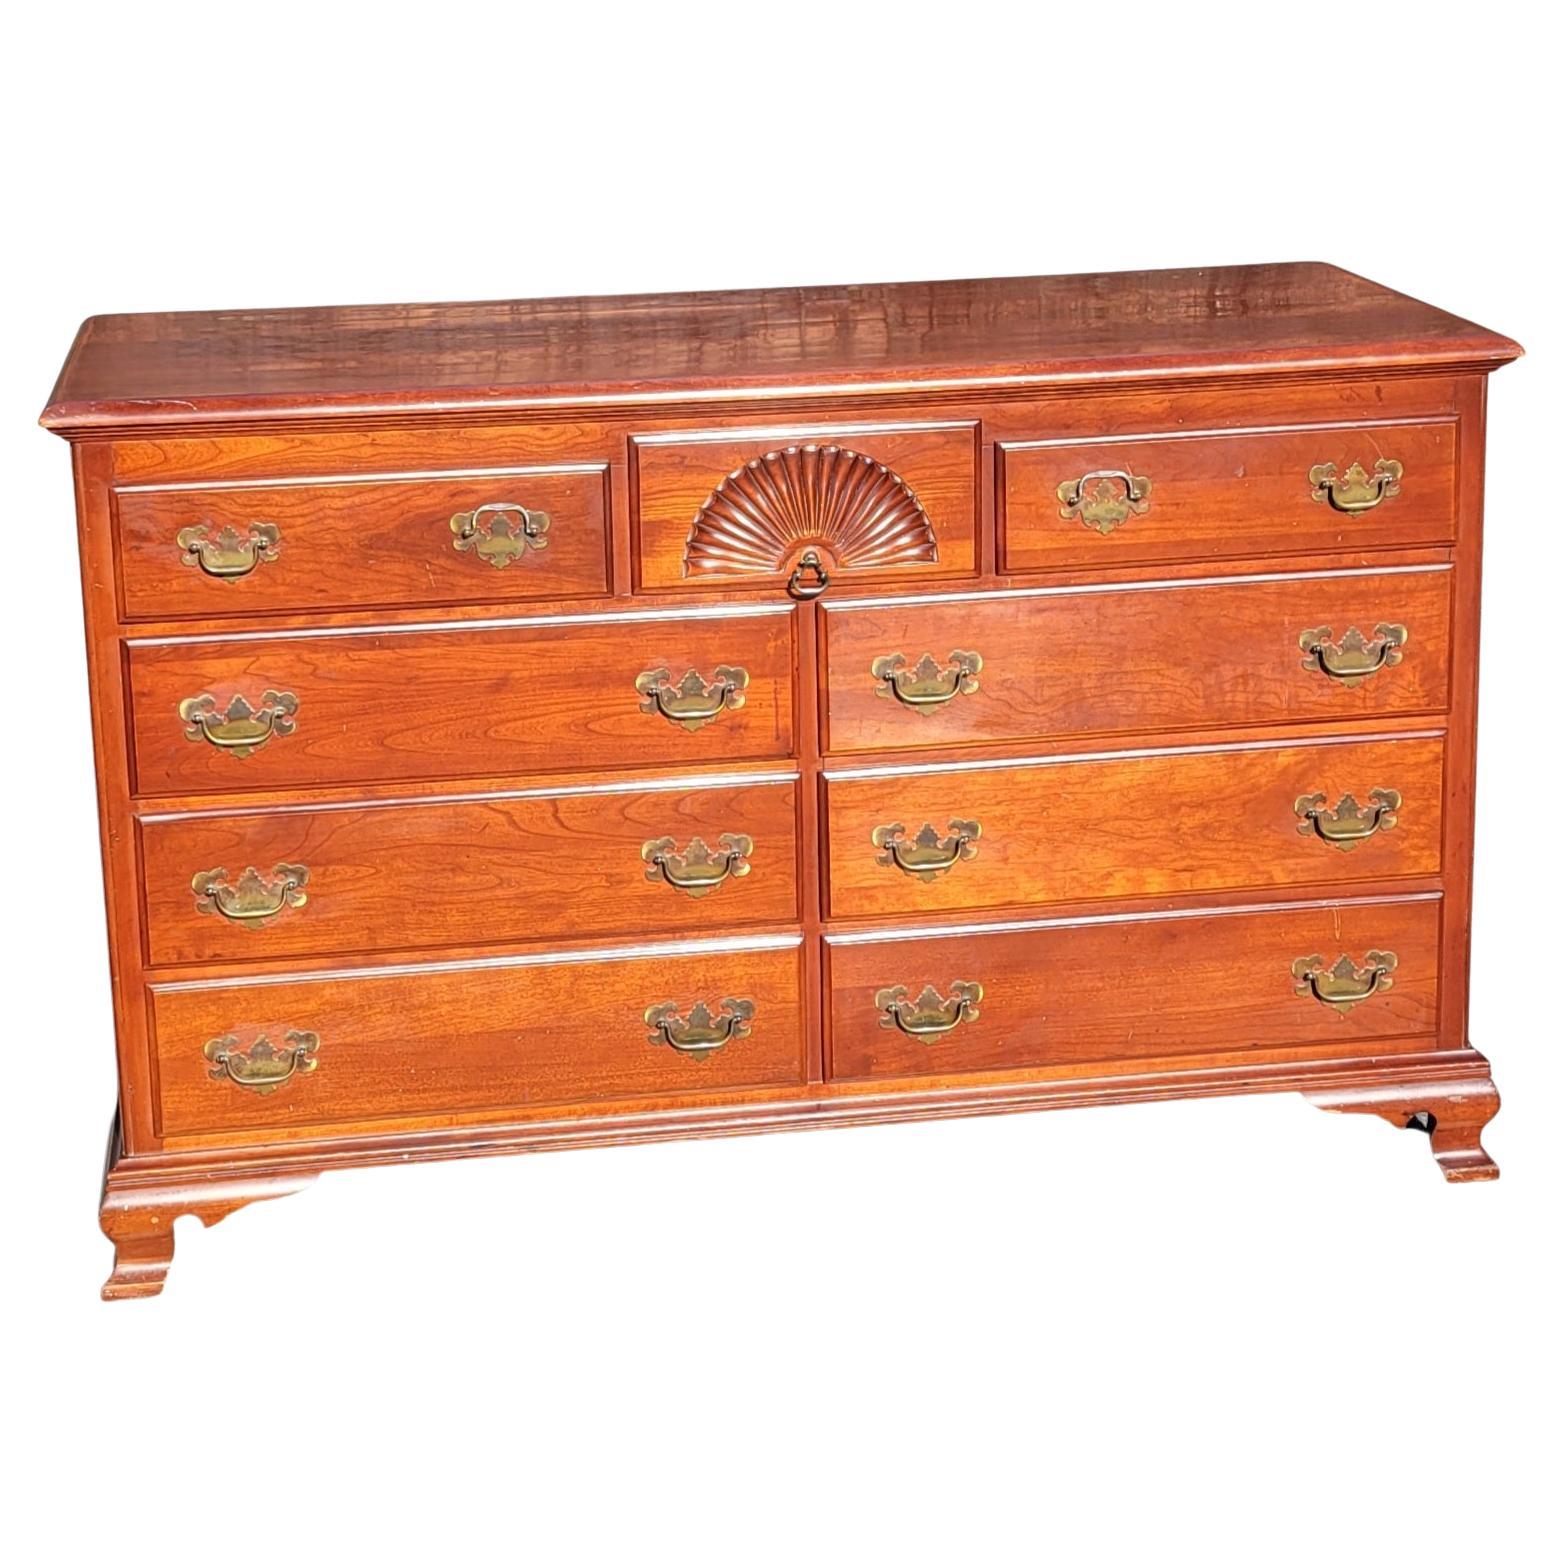 1960s Kling Factories' solid genuine cherry chippendale double dresser. 9 Dovetail joints drawers perfectly functioning, two of which are divided. Half bull nose top edge cut on the front and sides.
Clean vintage with wear cinsistent with age and